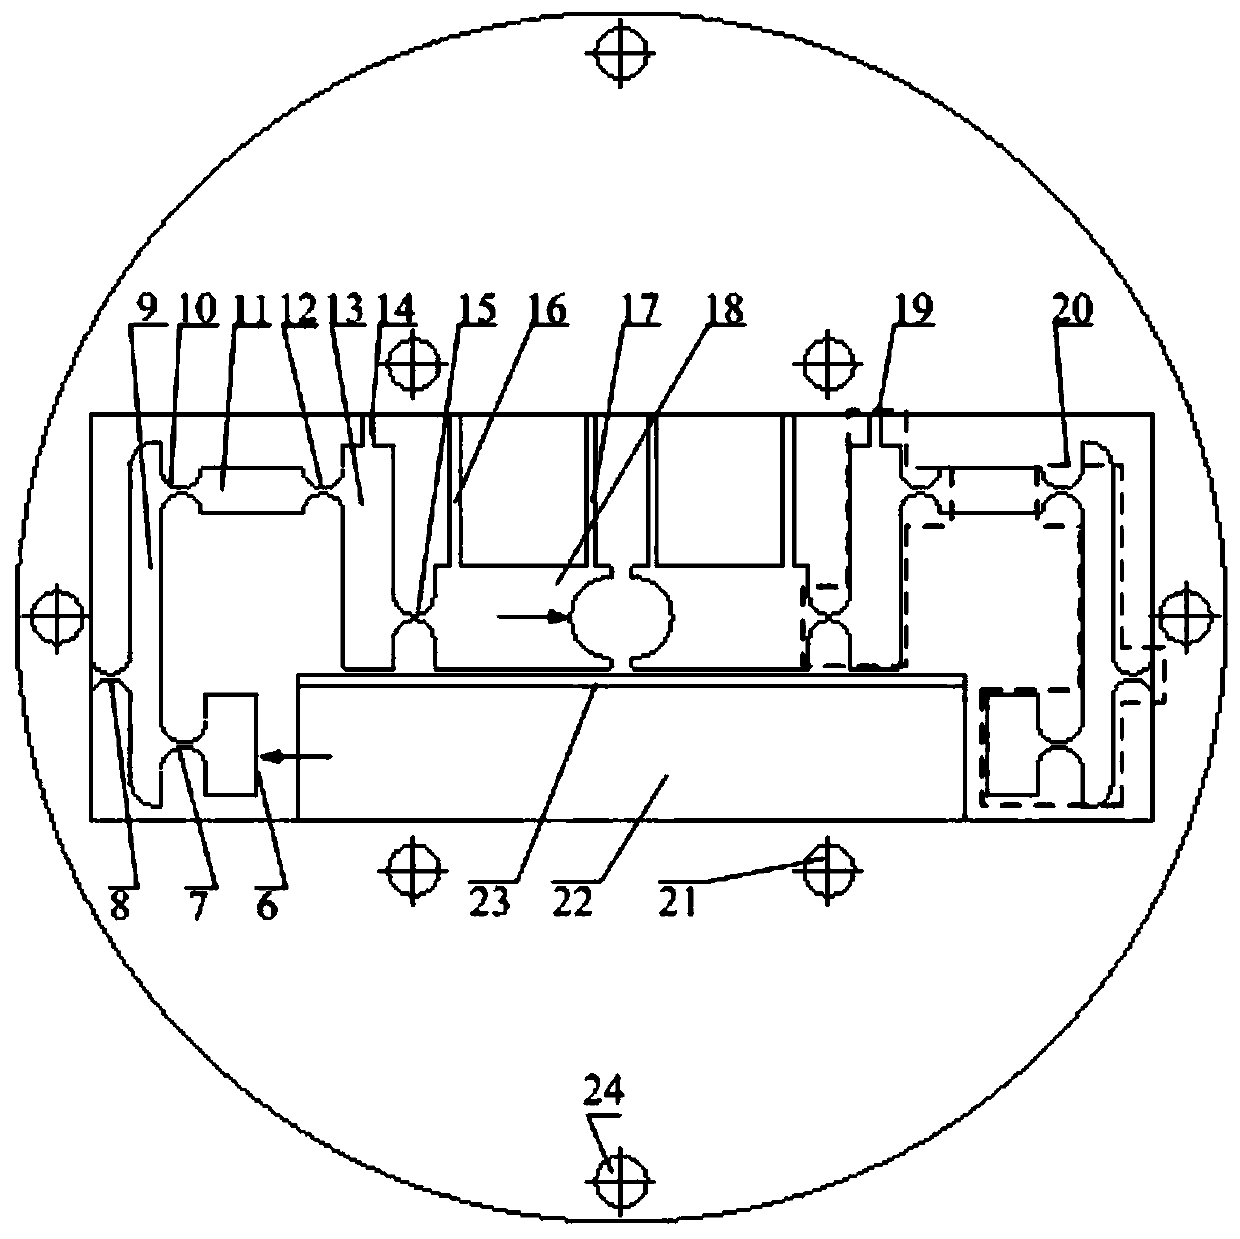 An inchworm precision rotary micro-actuator based on a compliant mechanism